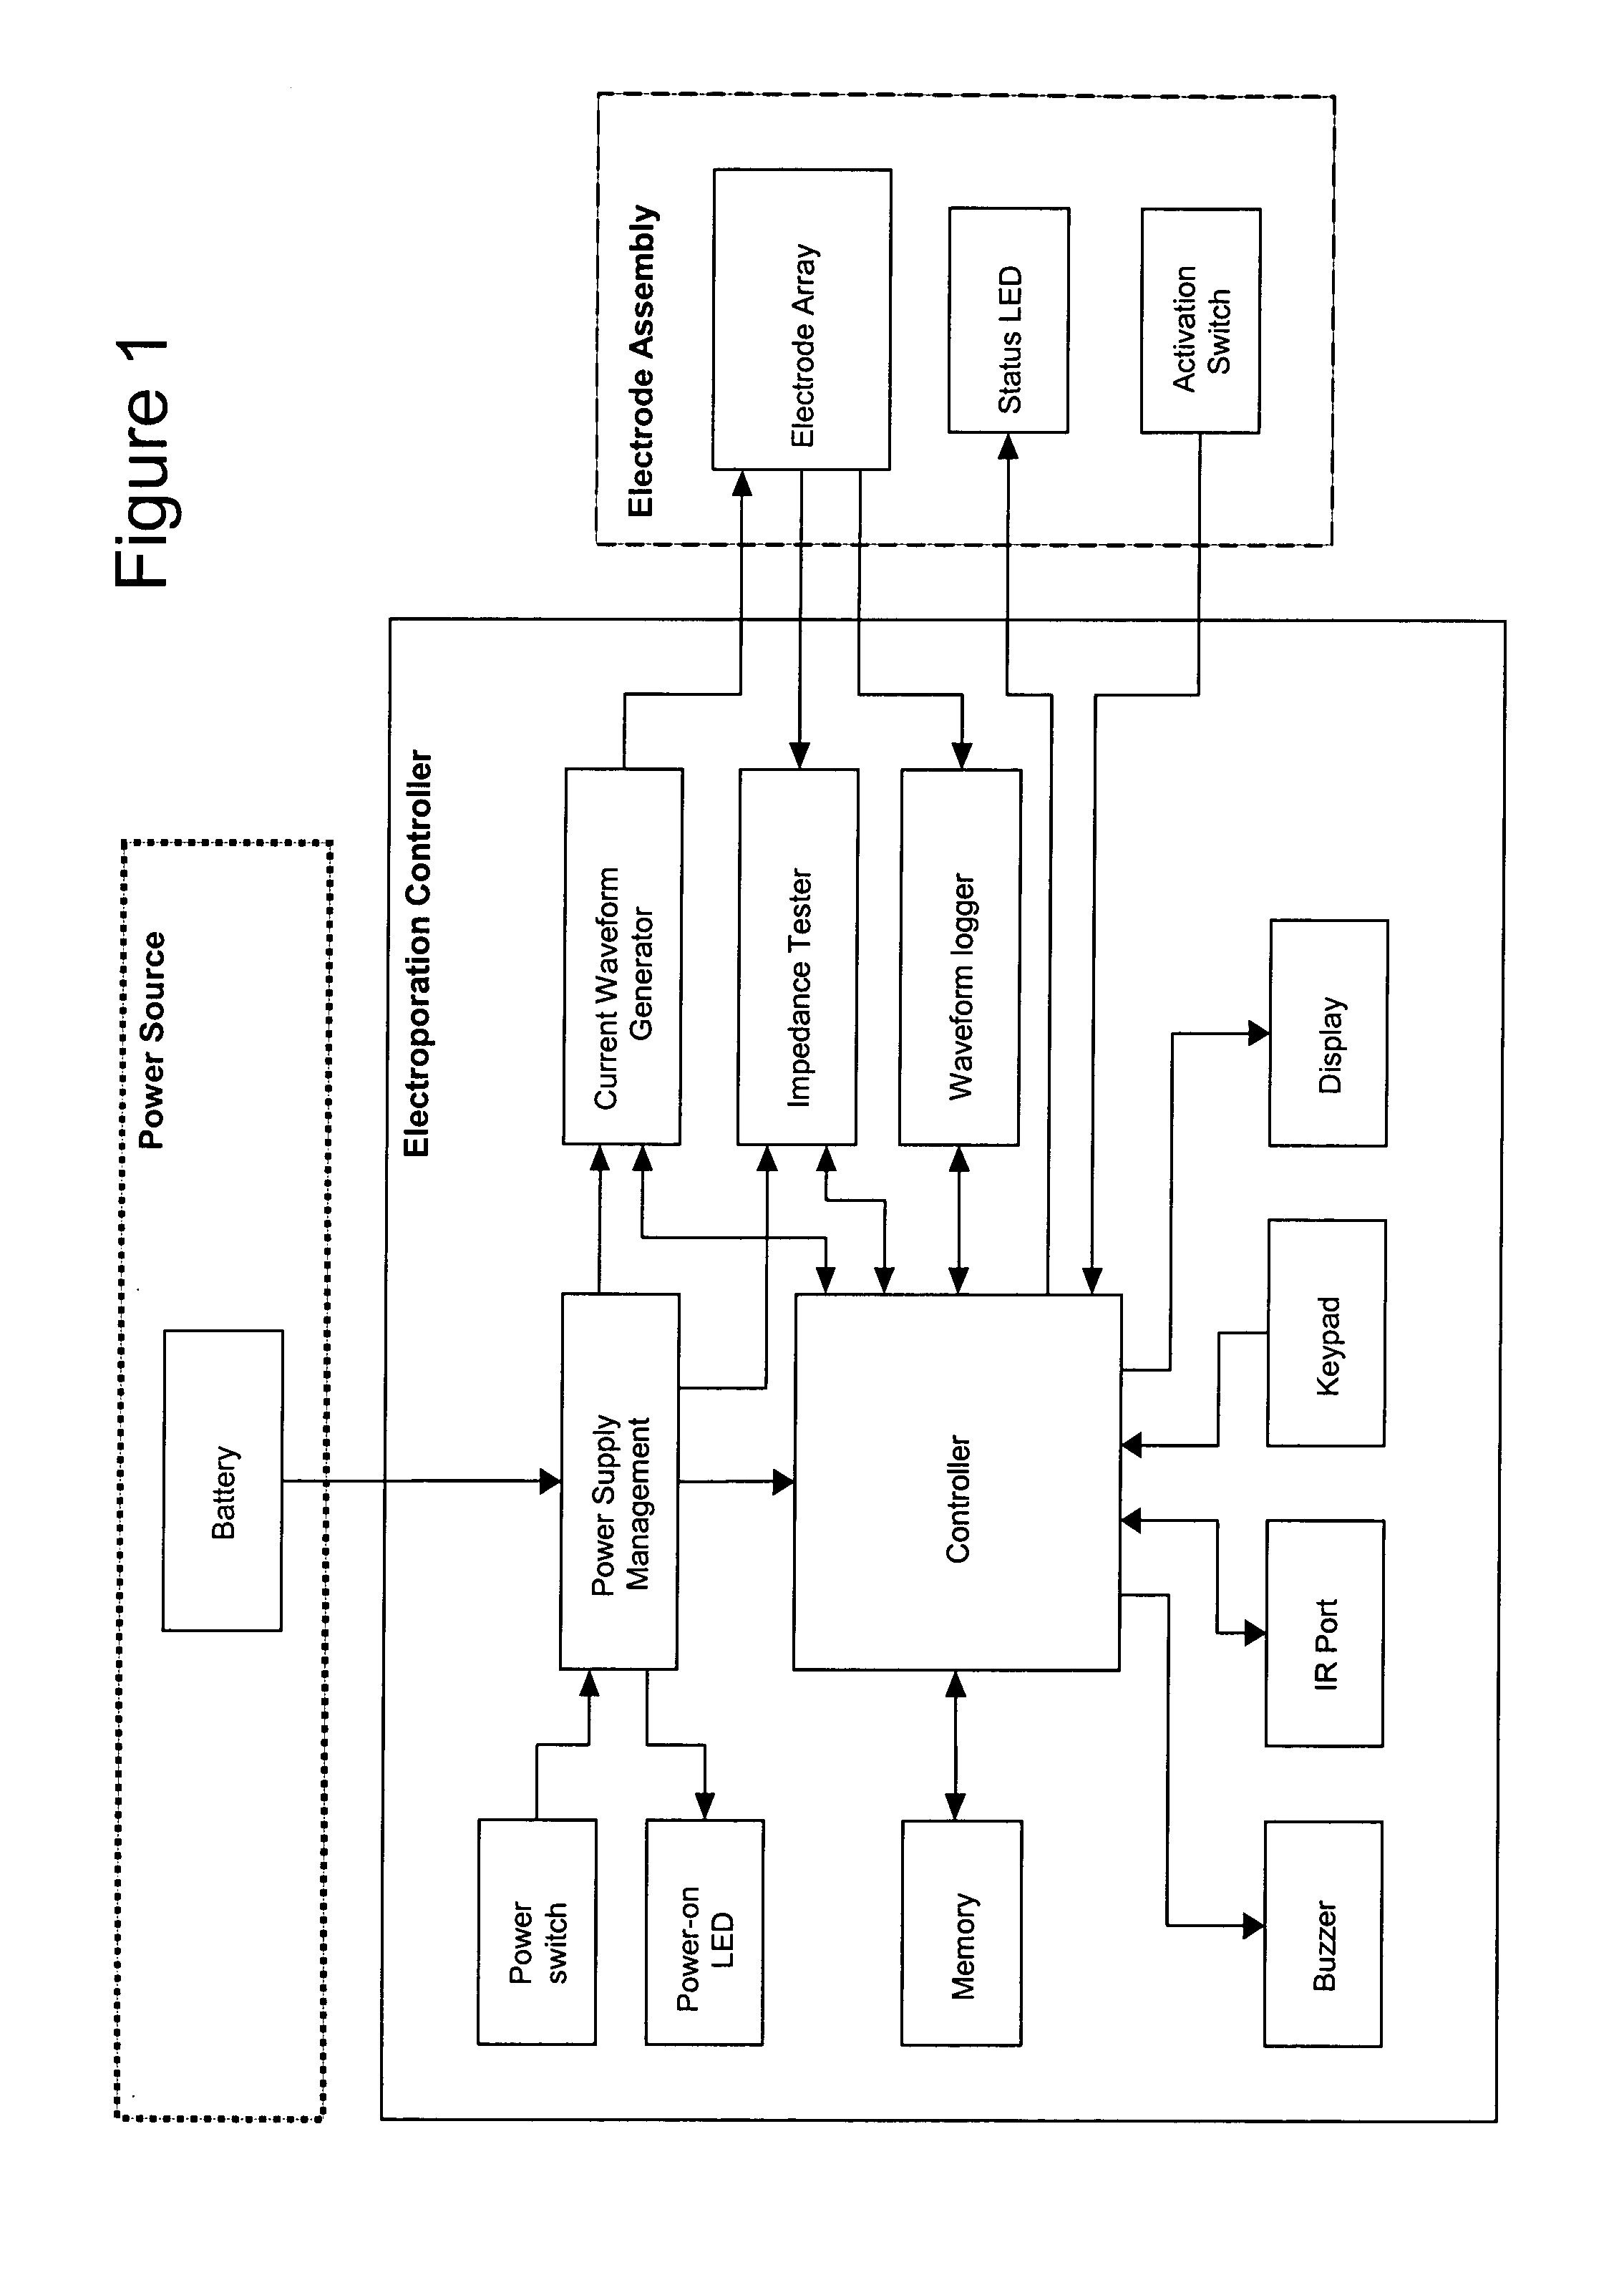 Constant current electroporation device and methods of use